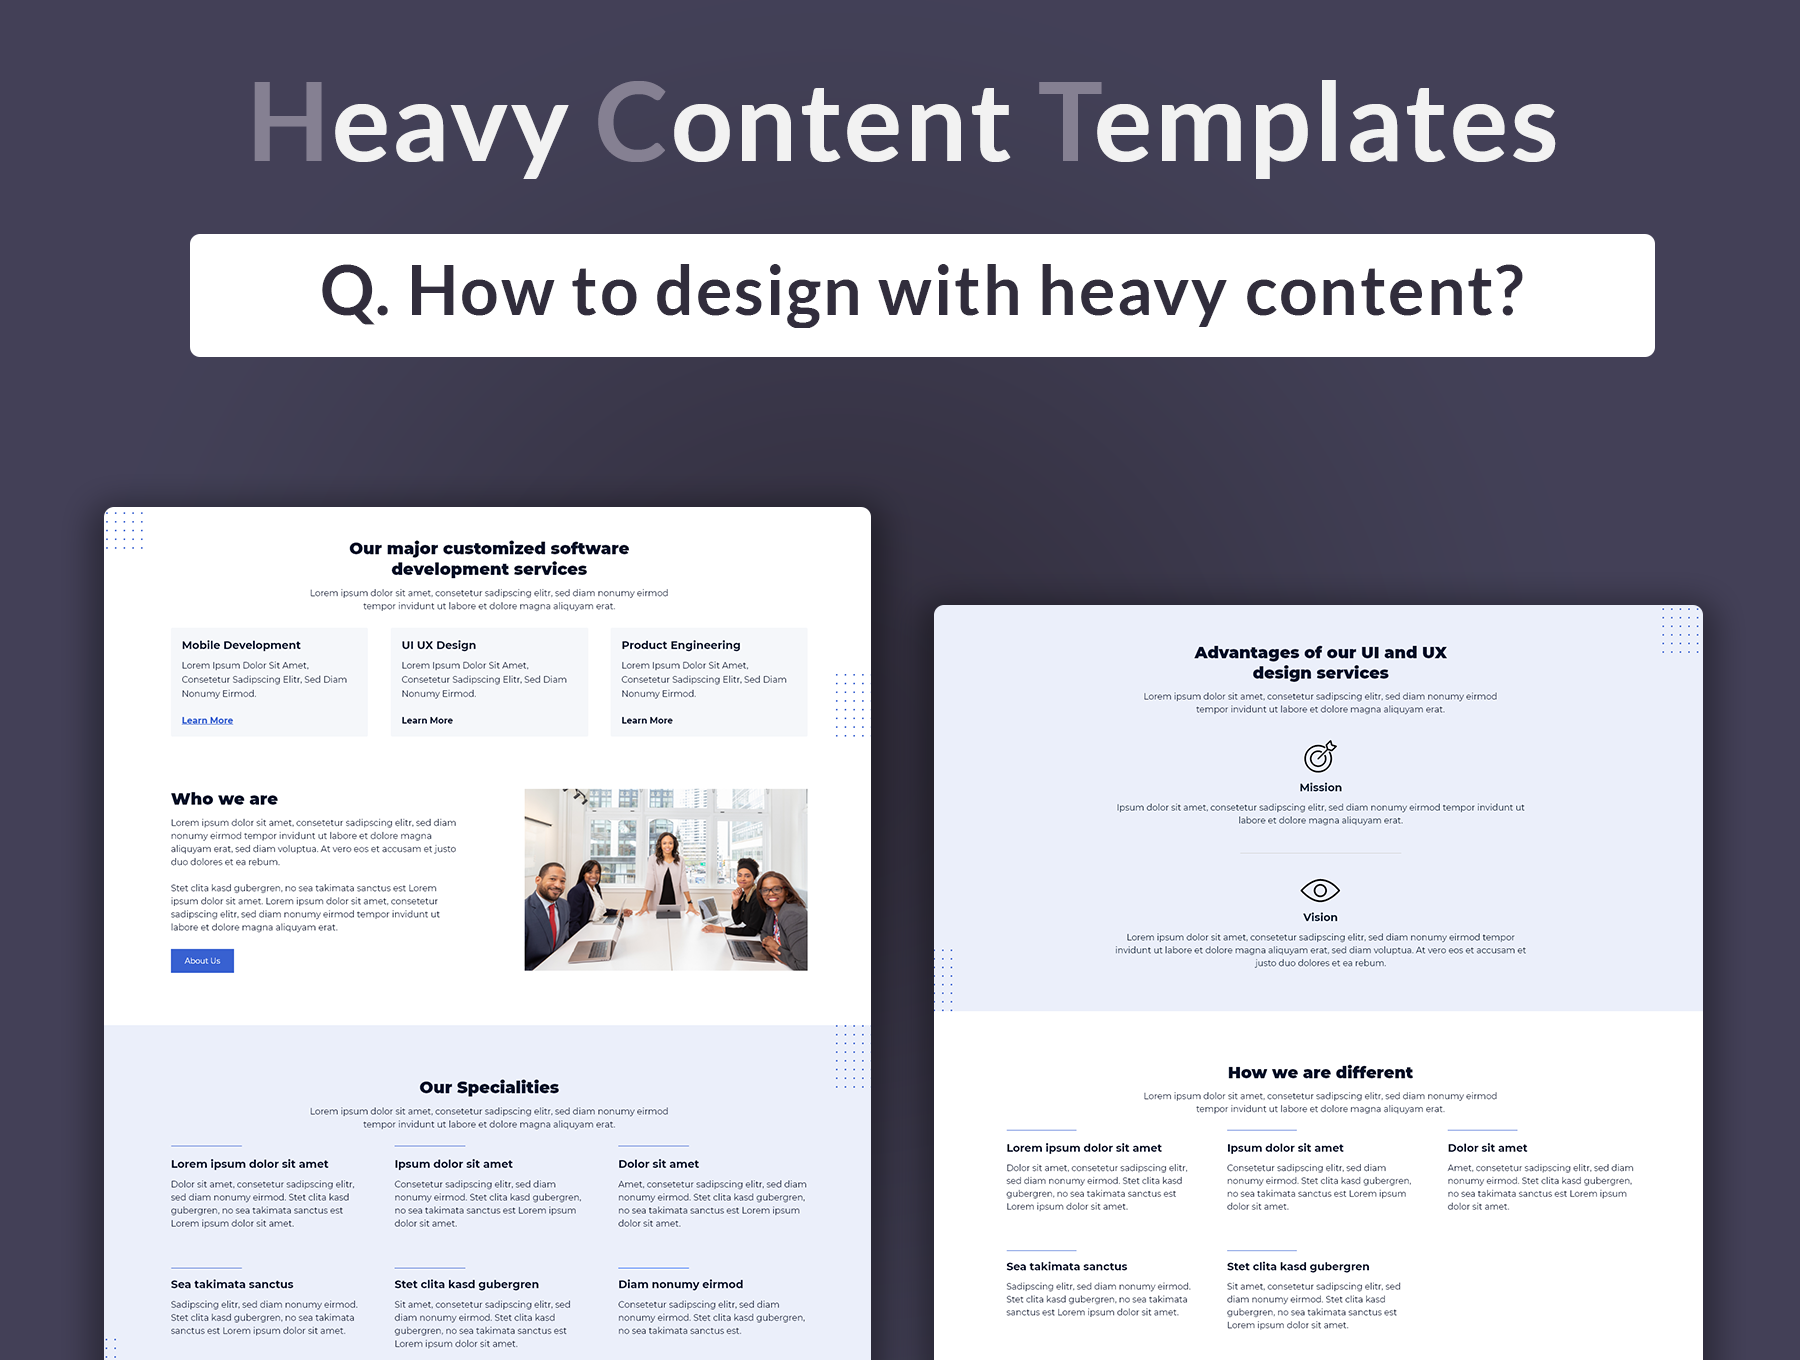 Learn how to design with heavy content.